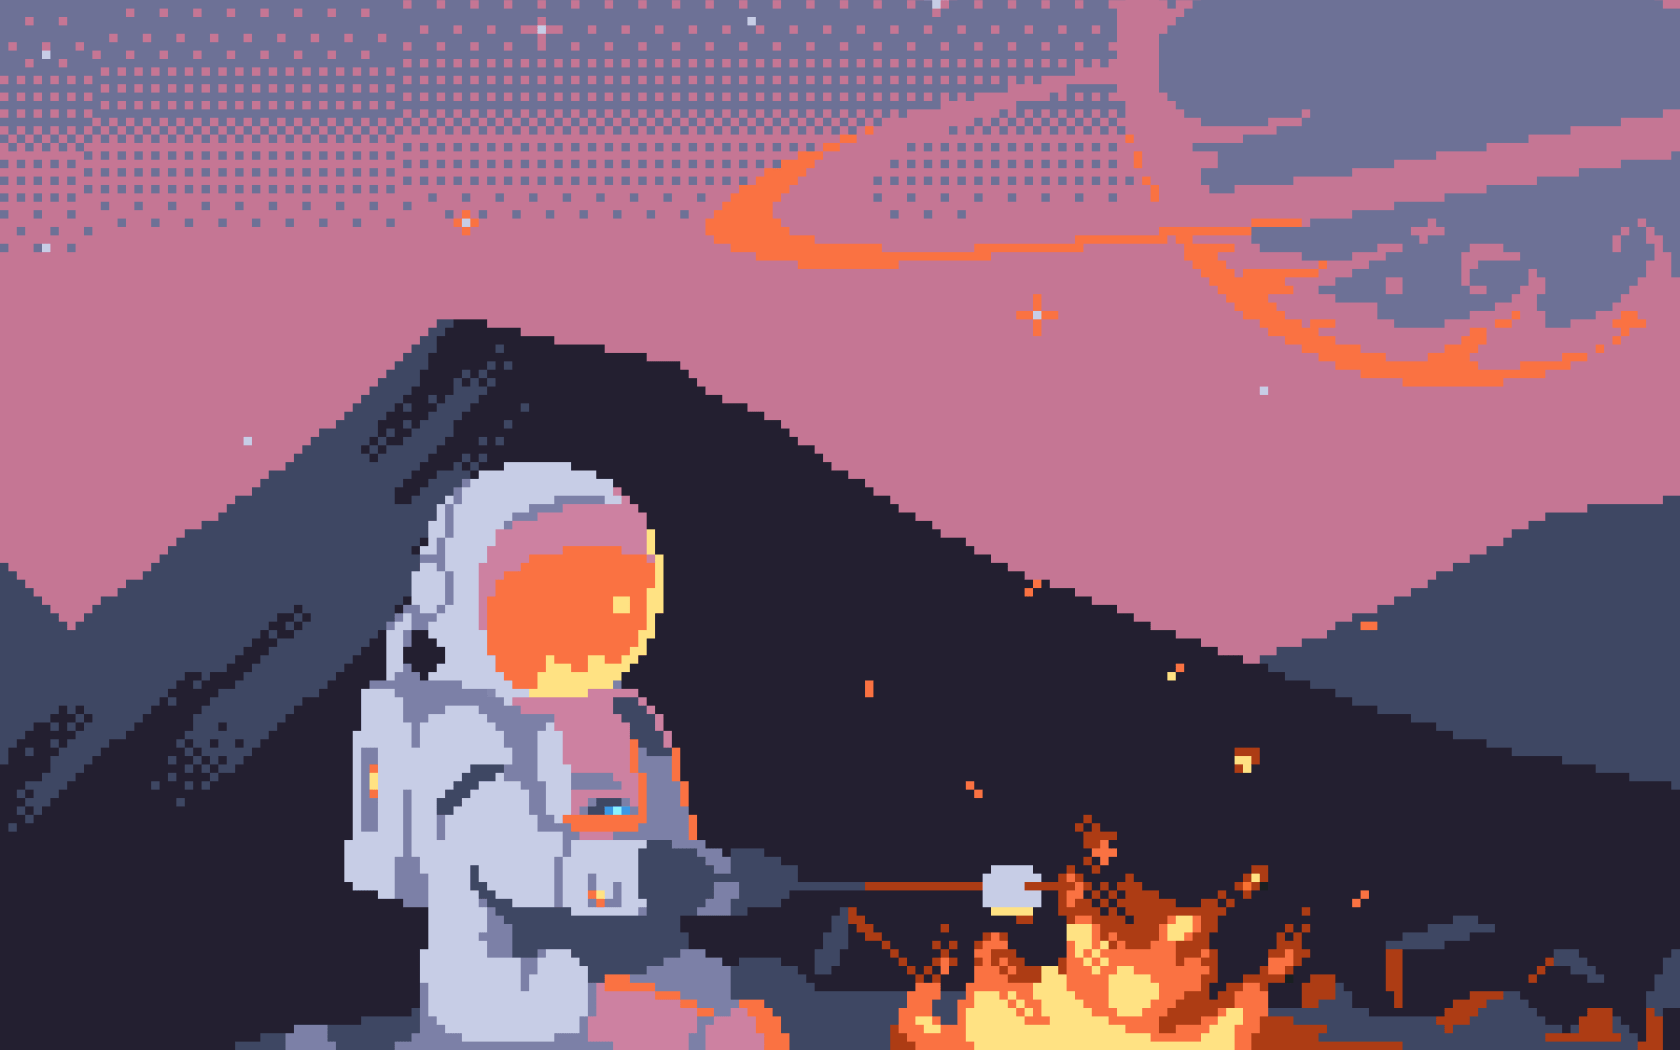 Pixel art illustration of an astronaut roasting a marshmallow over a campfire in space - Pixel art